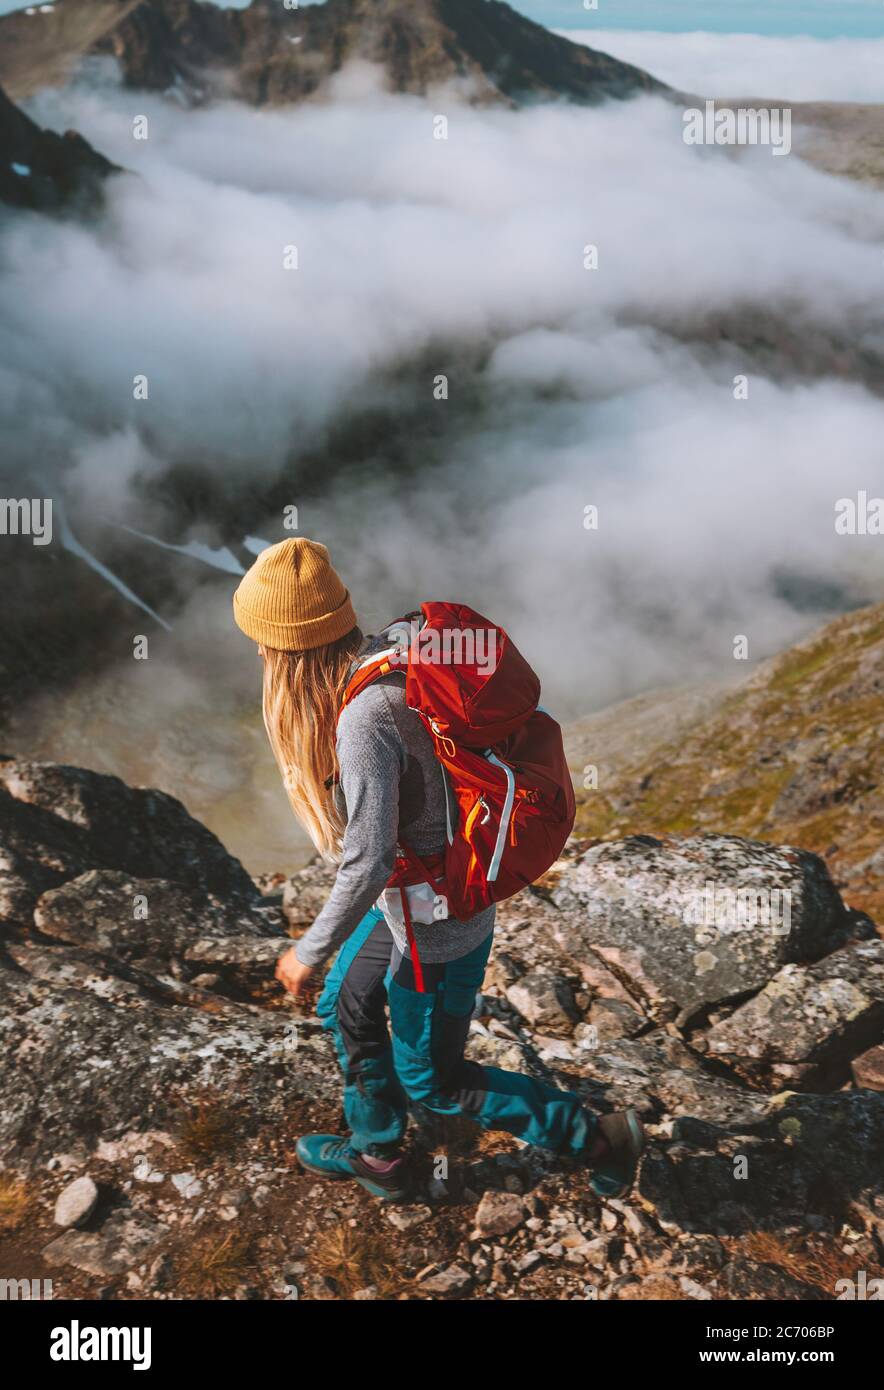 Woman hiking in mountains with red backpack travel trail running activity summer vacations healthy lifestyle outdoor adventure solo trekking in Norway Stock Photo